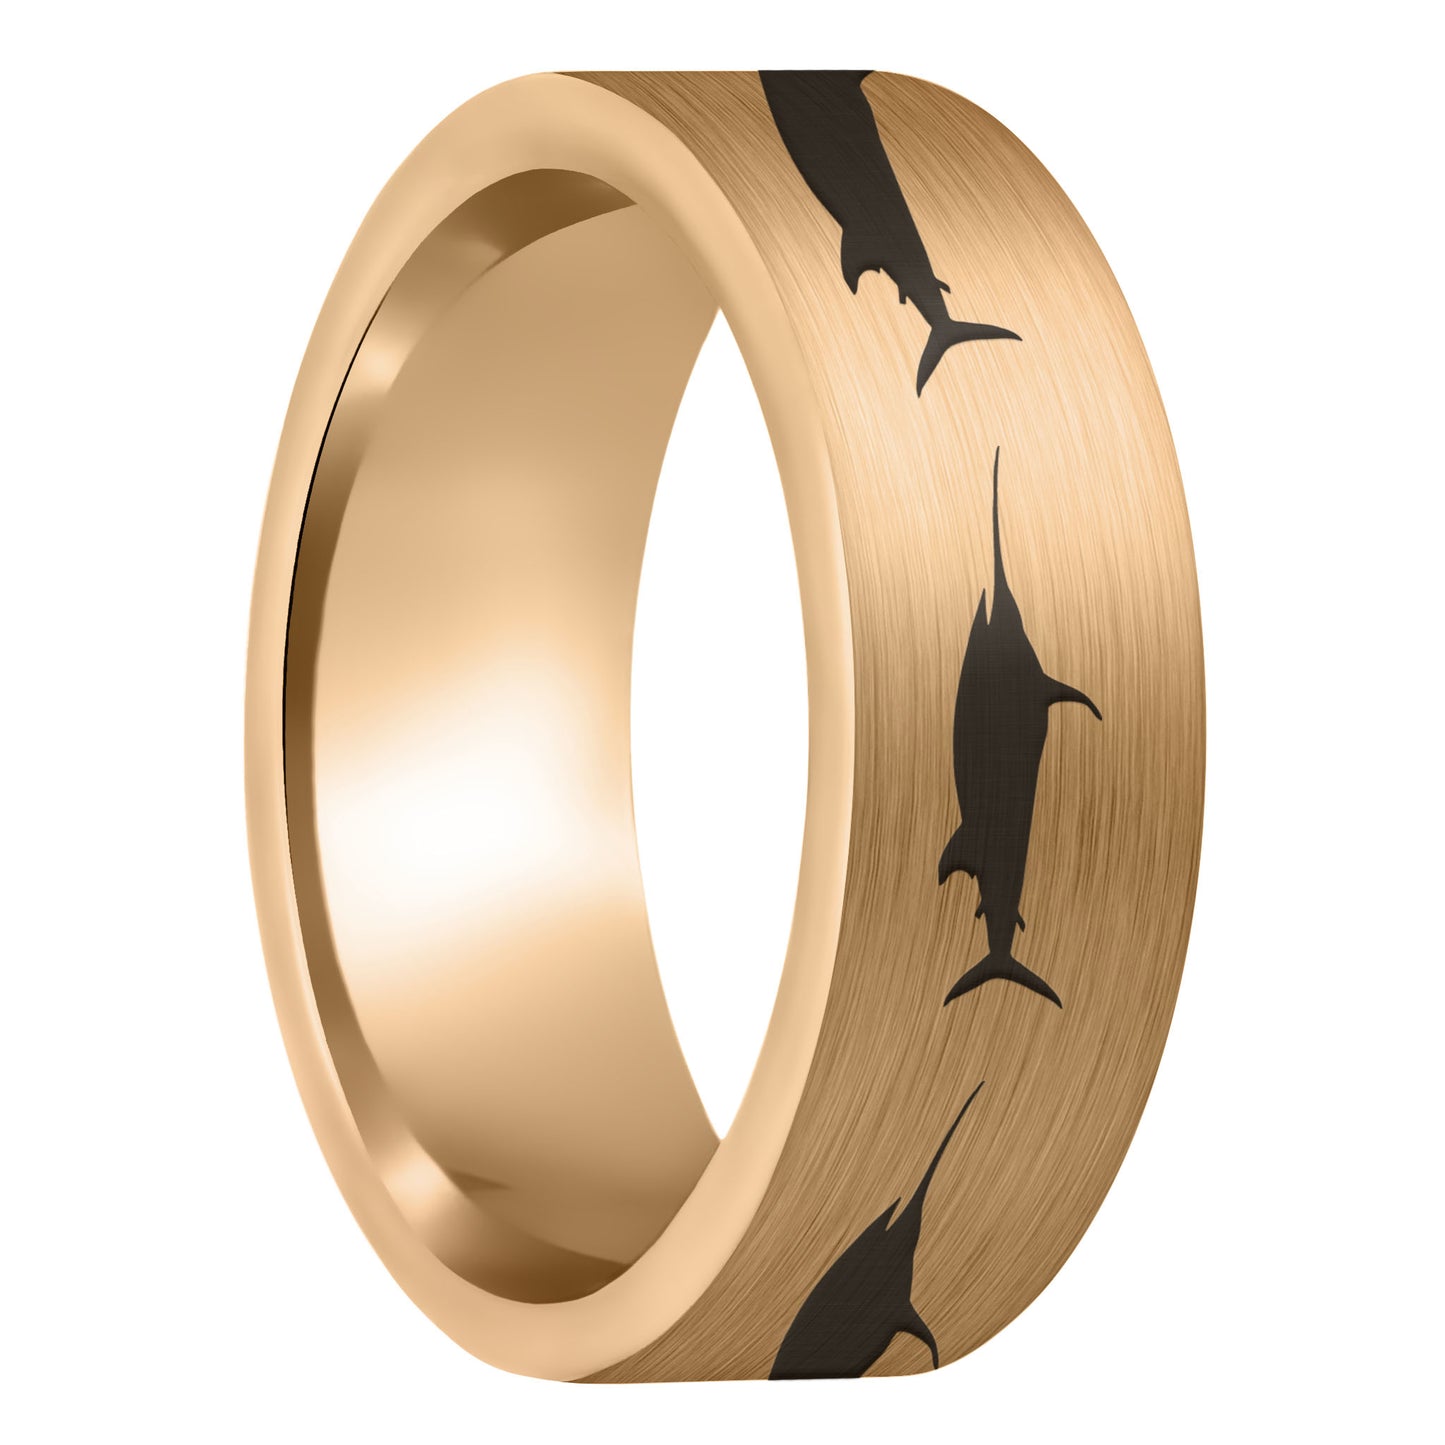 A swordfish brushed rose gold tungsten men's wedding band displayed on a plain white background.